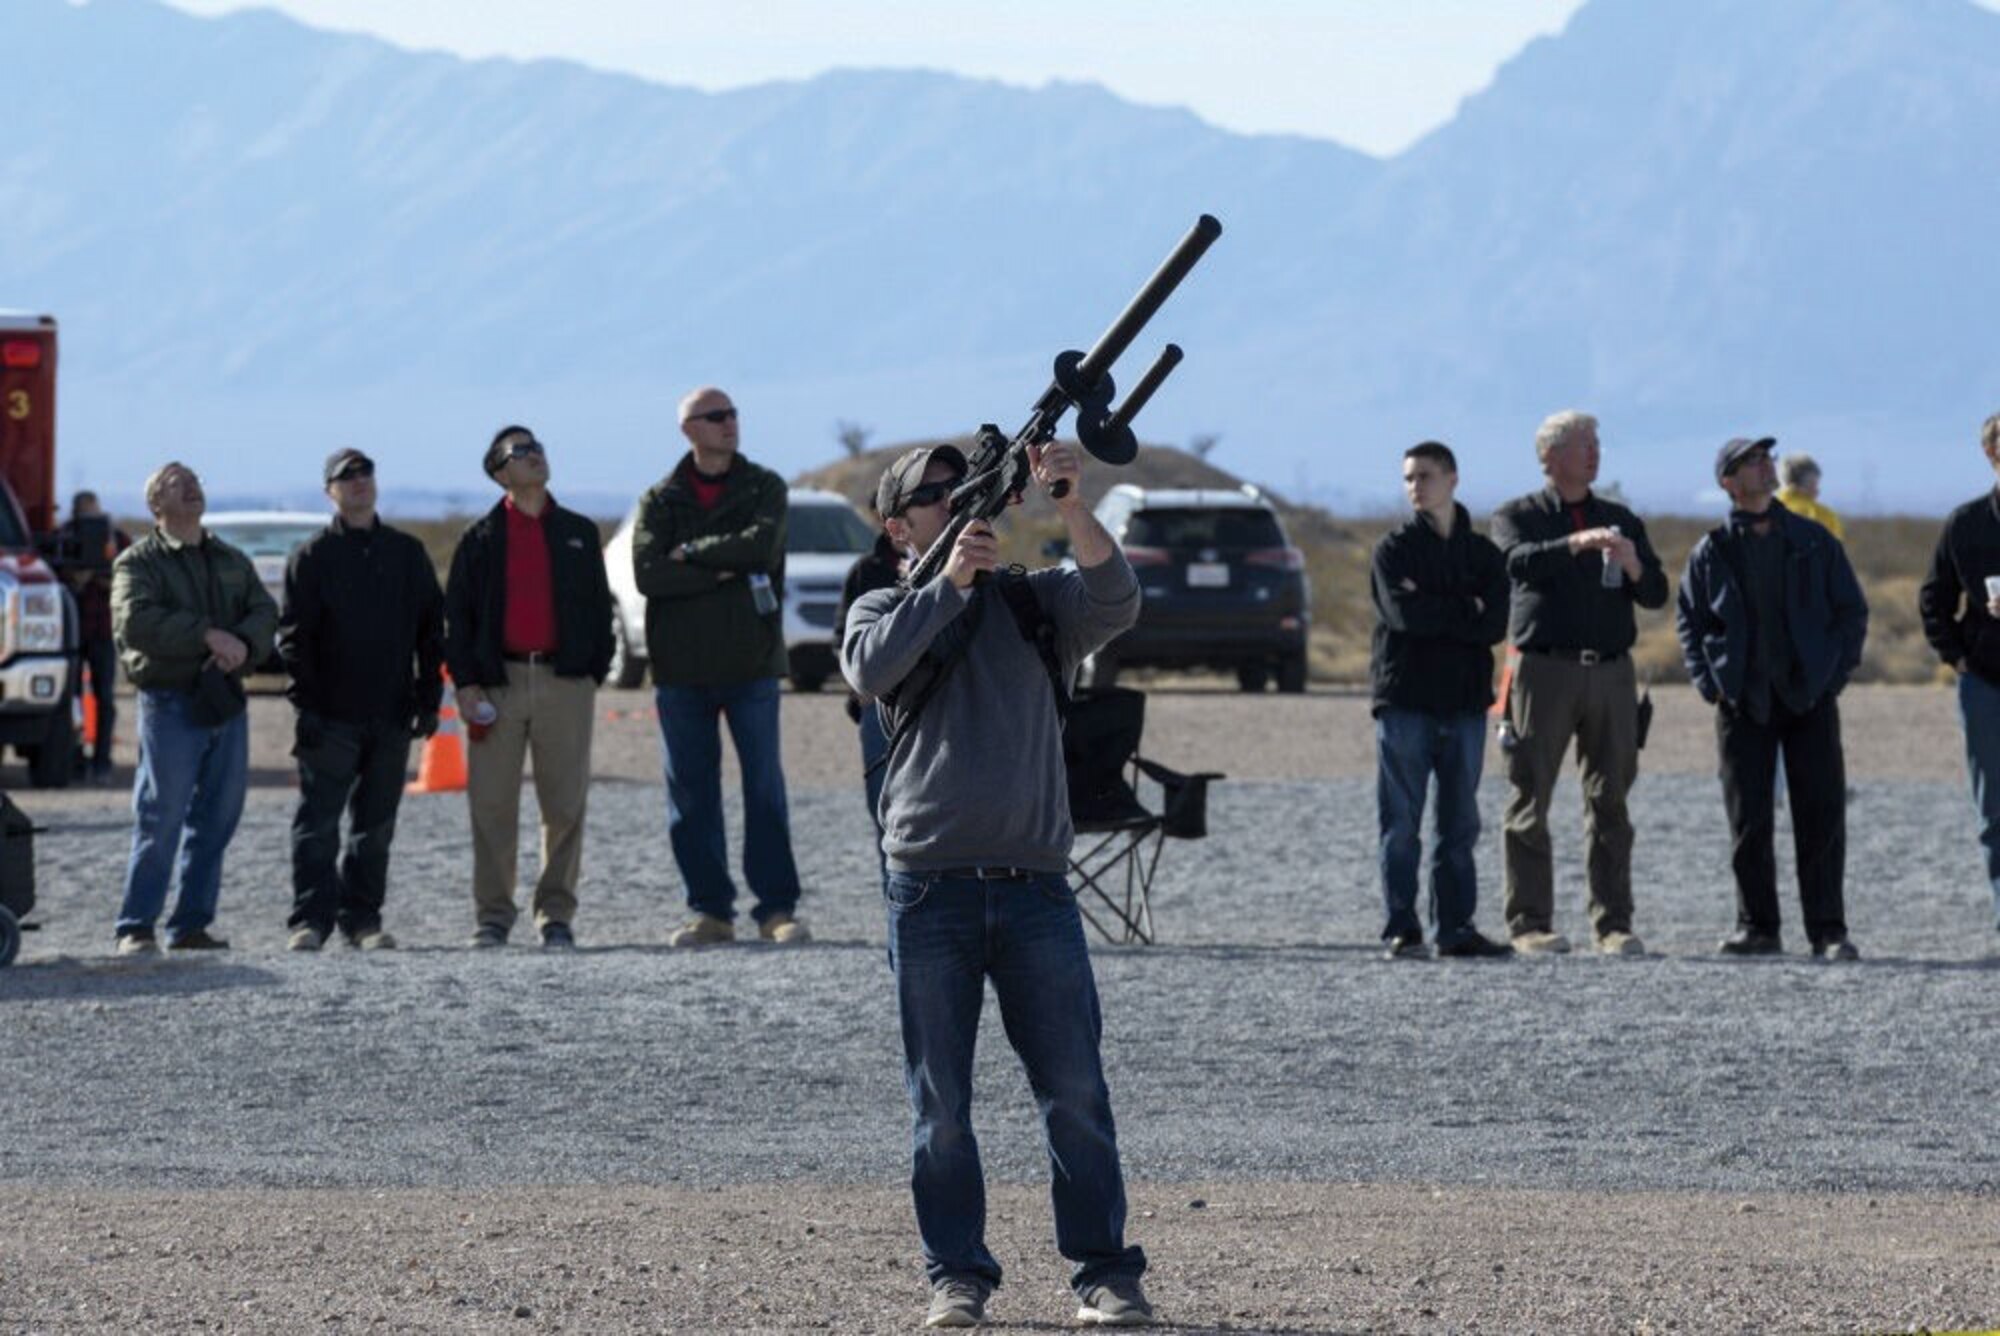 Justin Simpson, a member of the Kirtland Air Force Base team, aims a signal-jamming device at an unmanned aerial system as judges and range personnel watch Dec. 12 during the 2016 Air Force Research Laboratory Commander's Challenge at the Nevada National Security Site near Las Vegas, Nevada. Teams were given six months to develop a complete system to aid in base defense. Kirtland's system is able to detect, identify and track unmanned aerial systems with the capability of engaging through signal jamming and capture using a net gun.